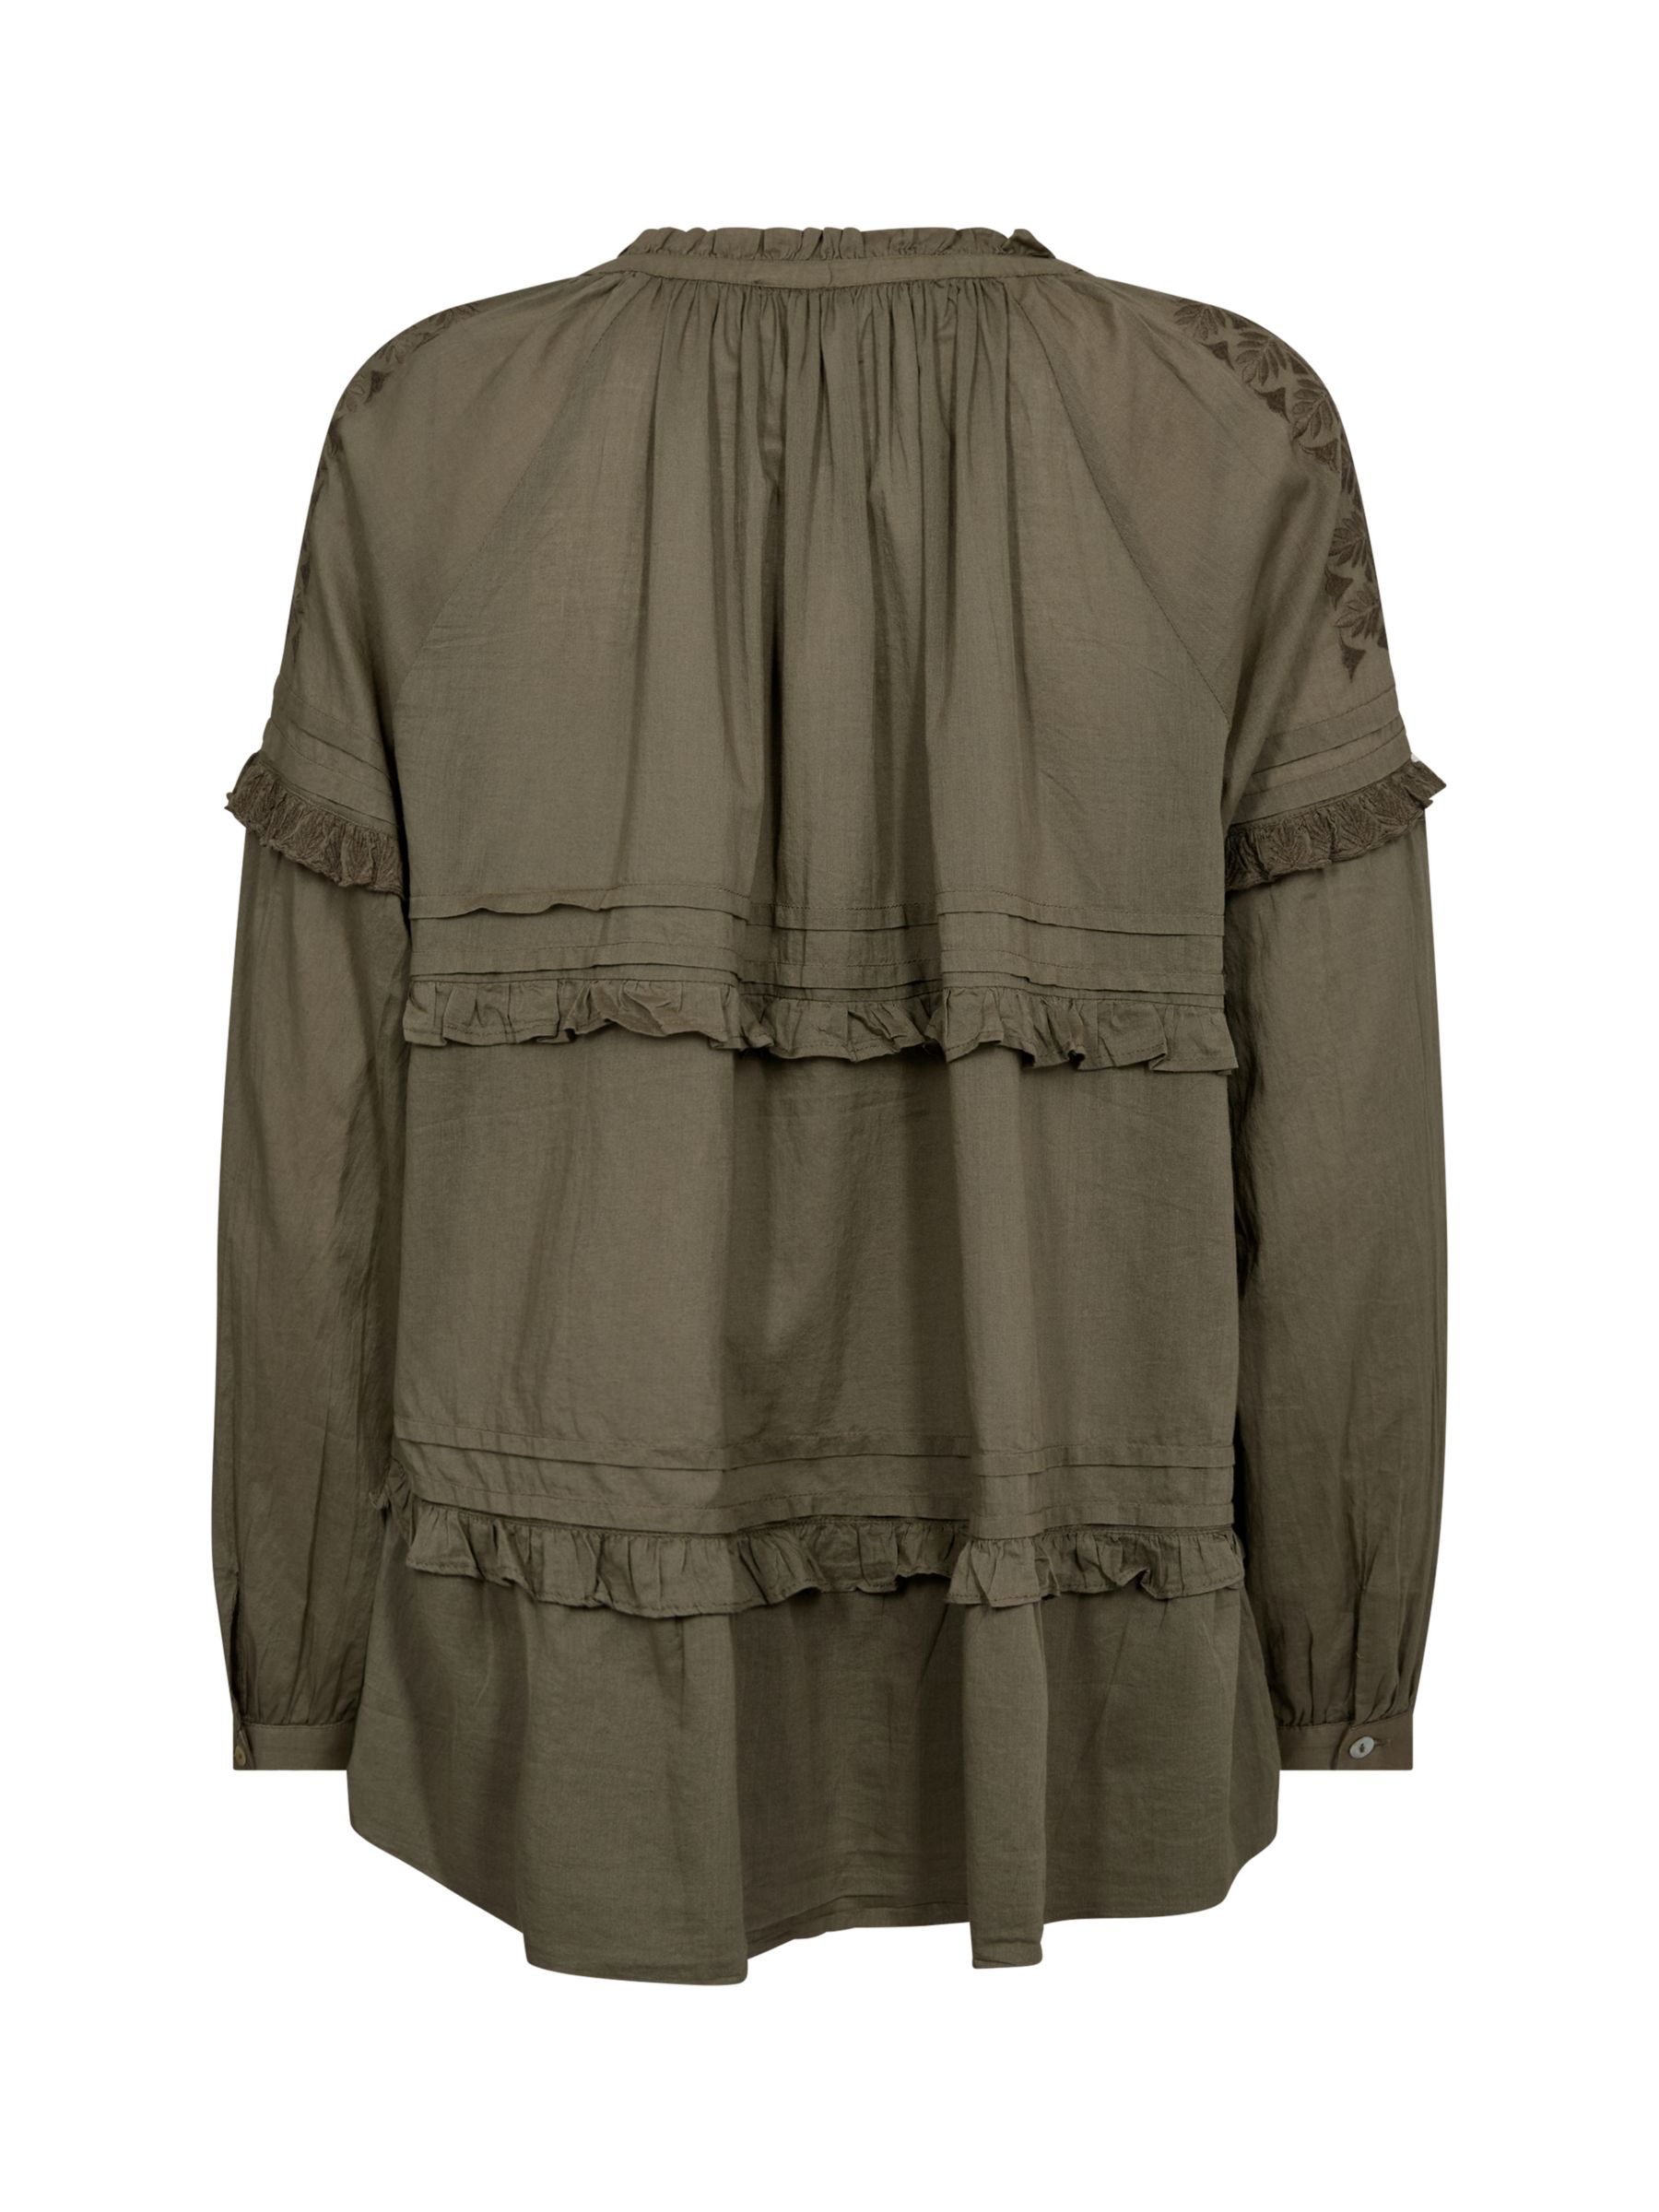 MOS MOSH Lou Cotton Voile Embroidered Blouse, Dusty Olive, XS